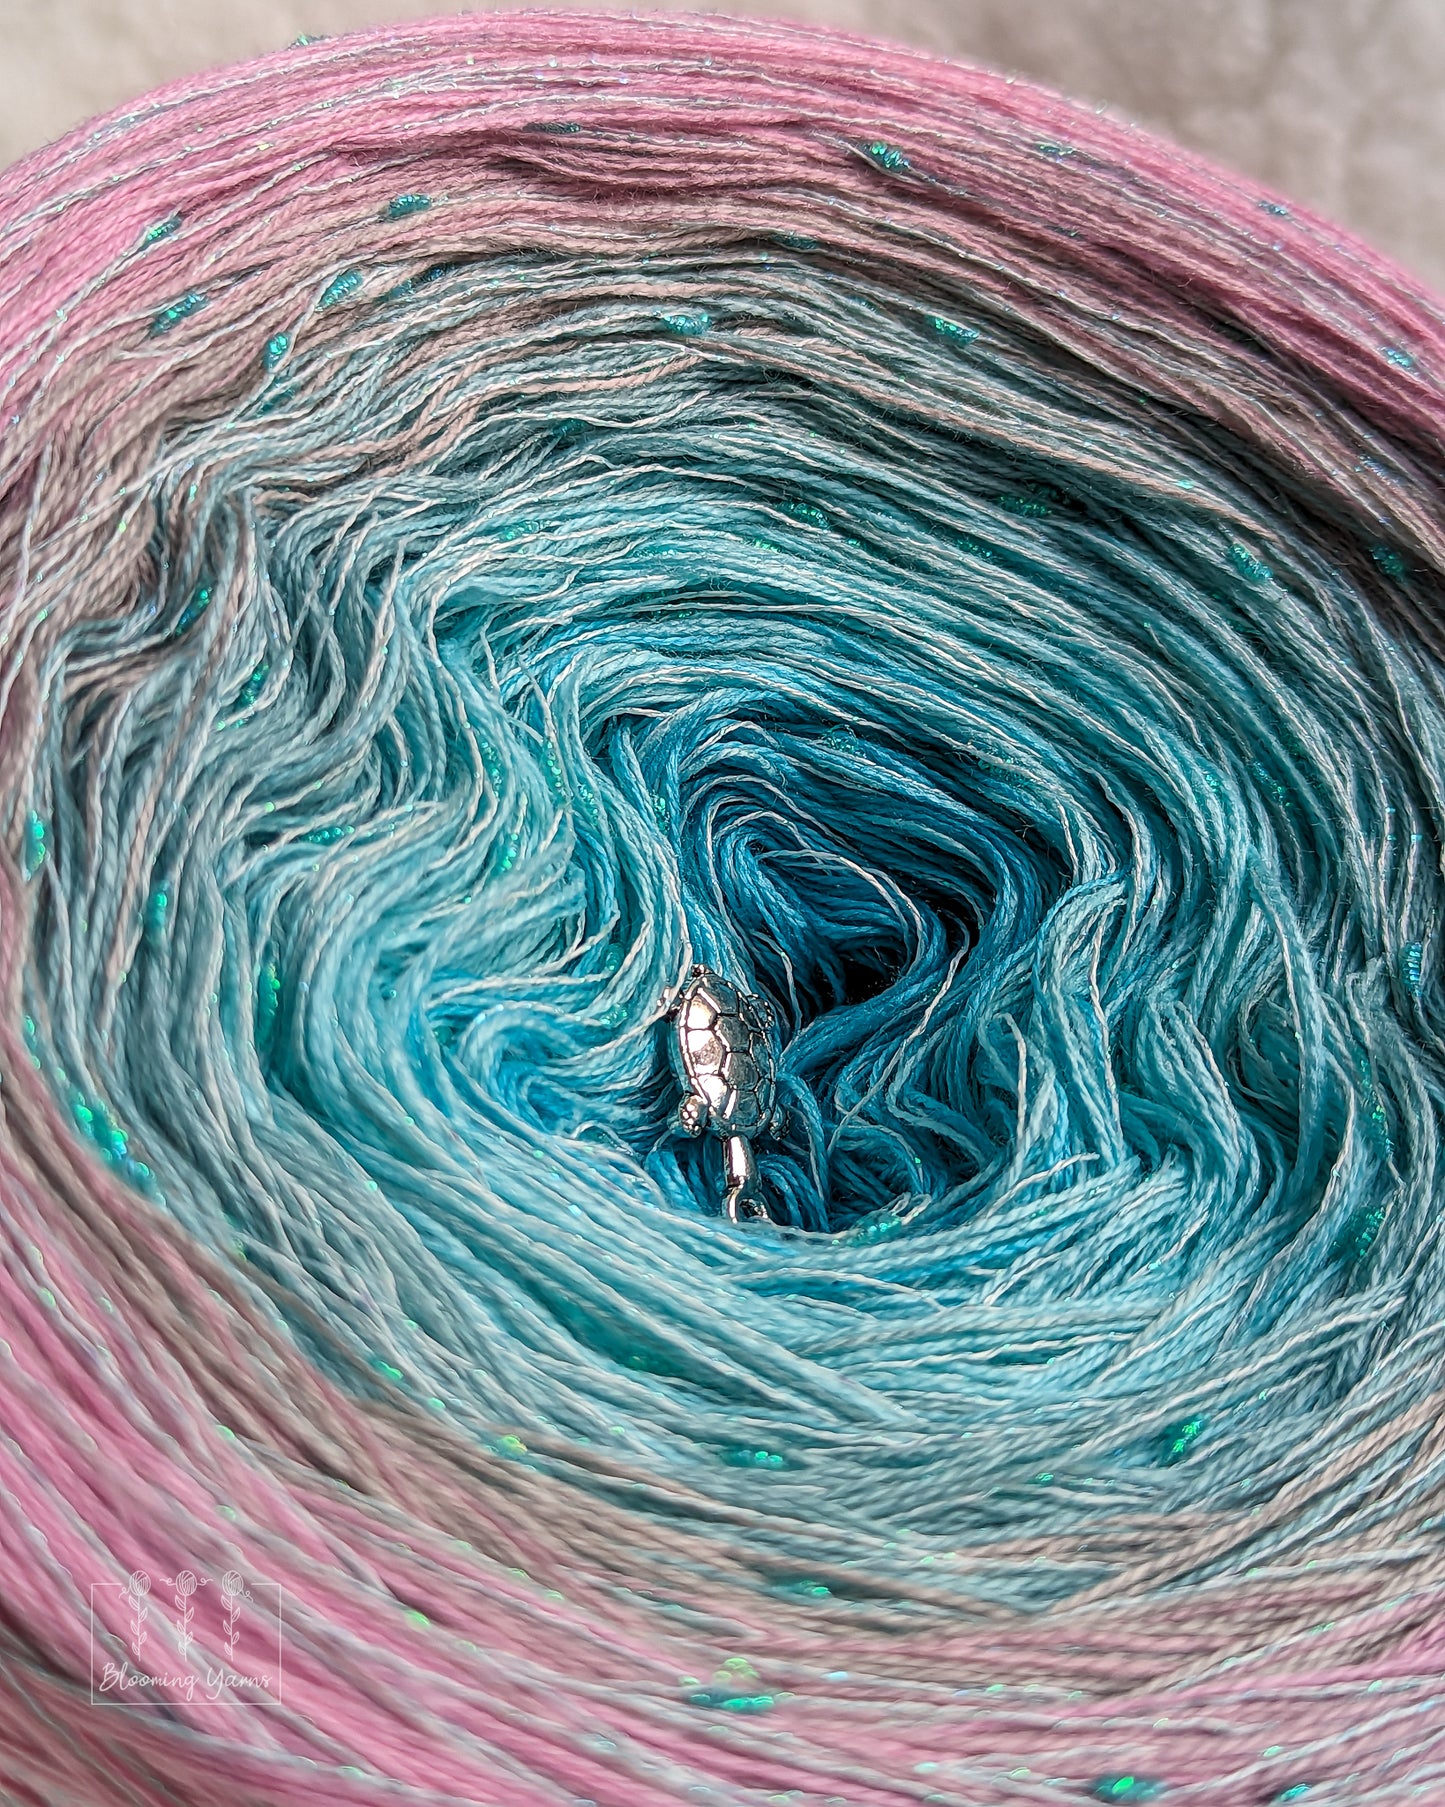 "Flamingo by the sea" gradient yarn cake created by Ancy-Fancy